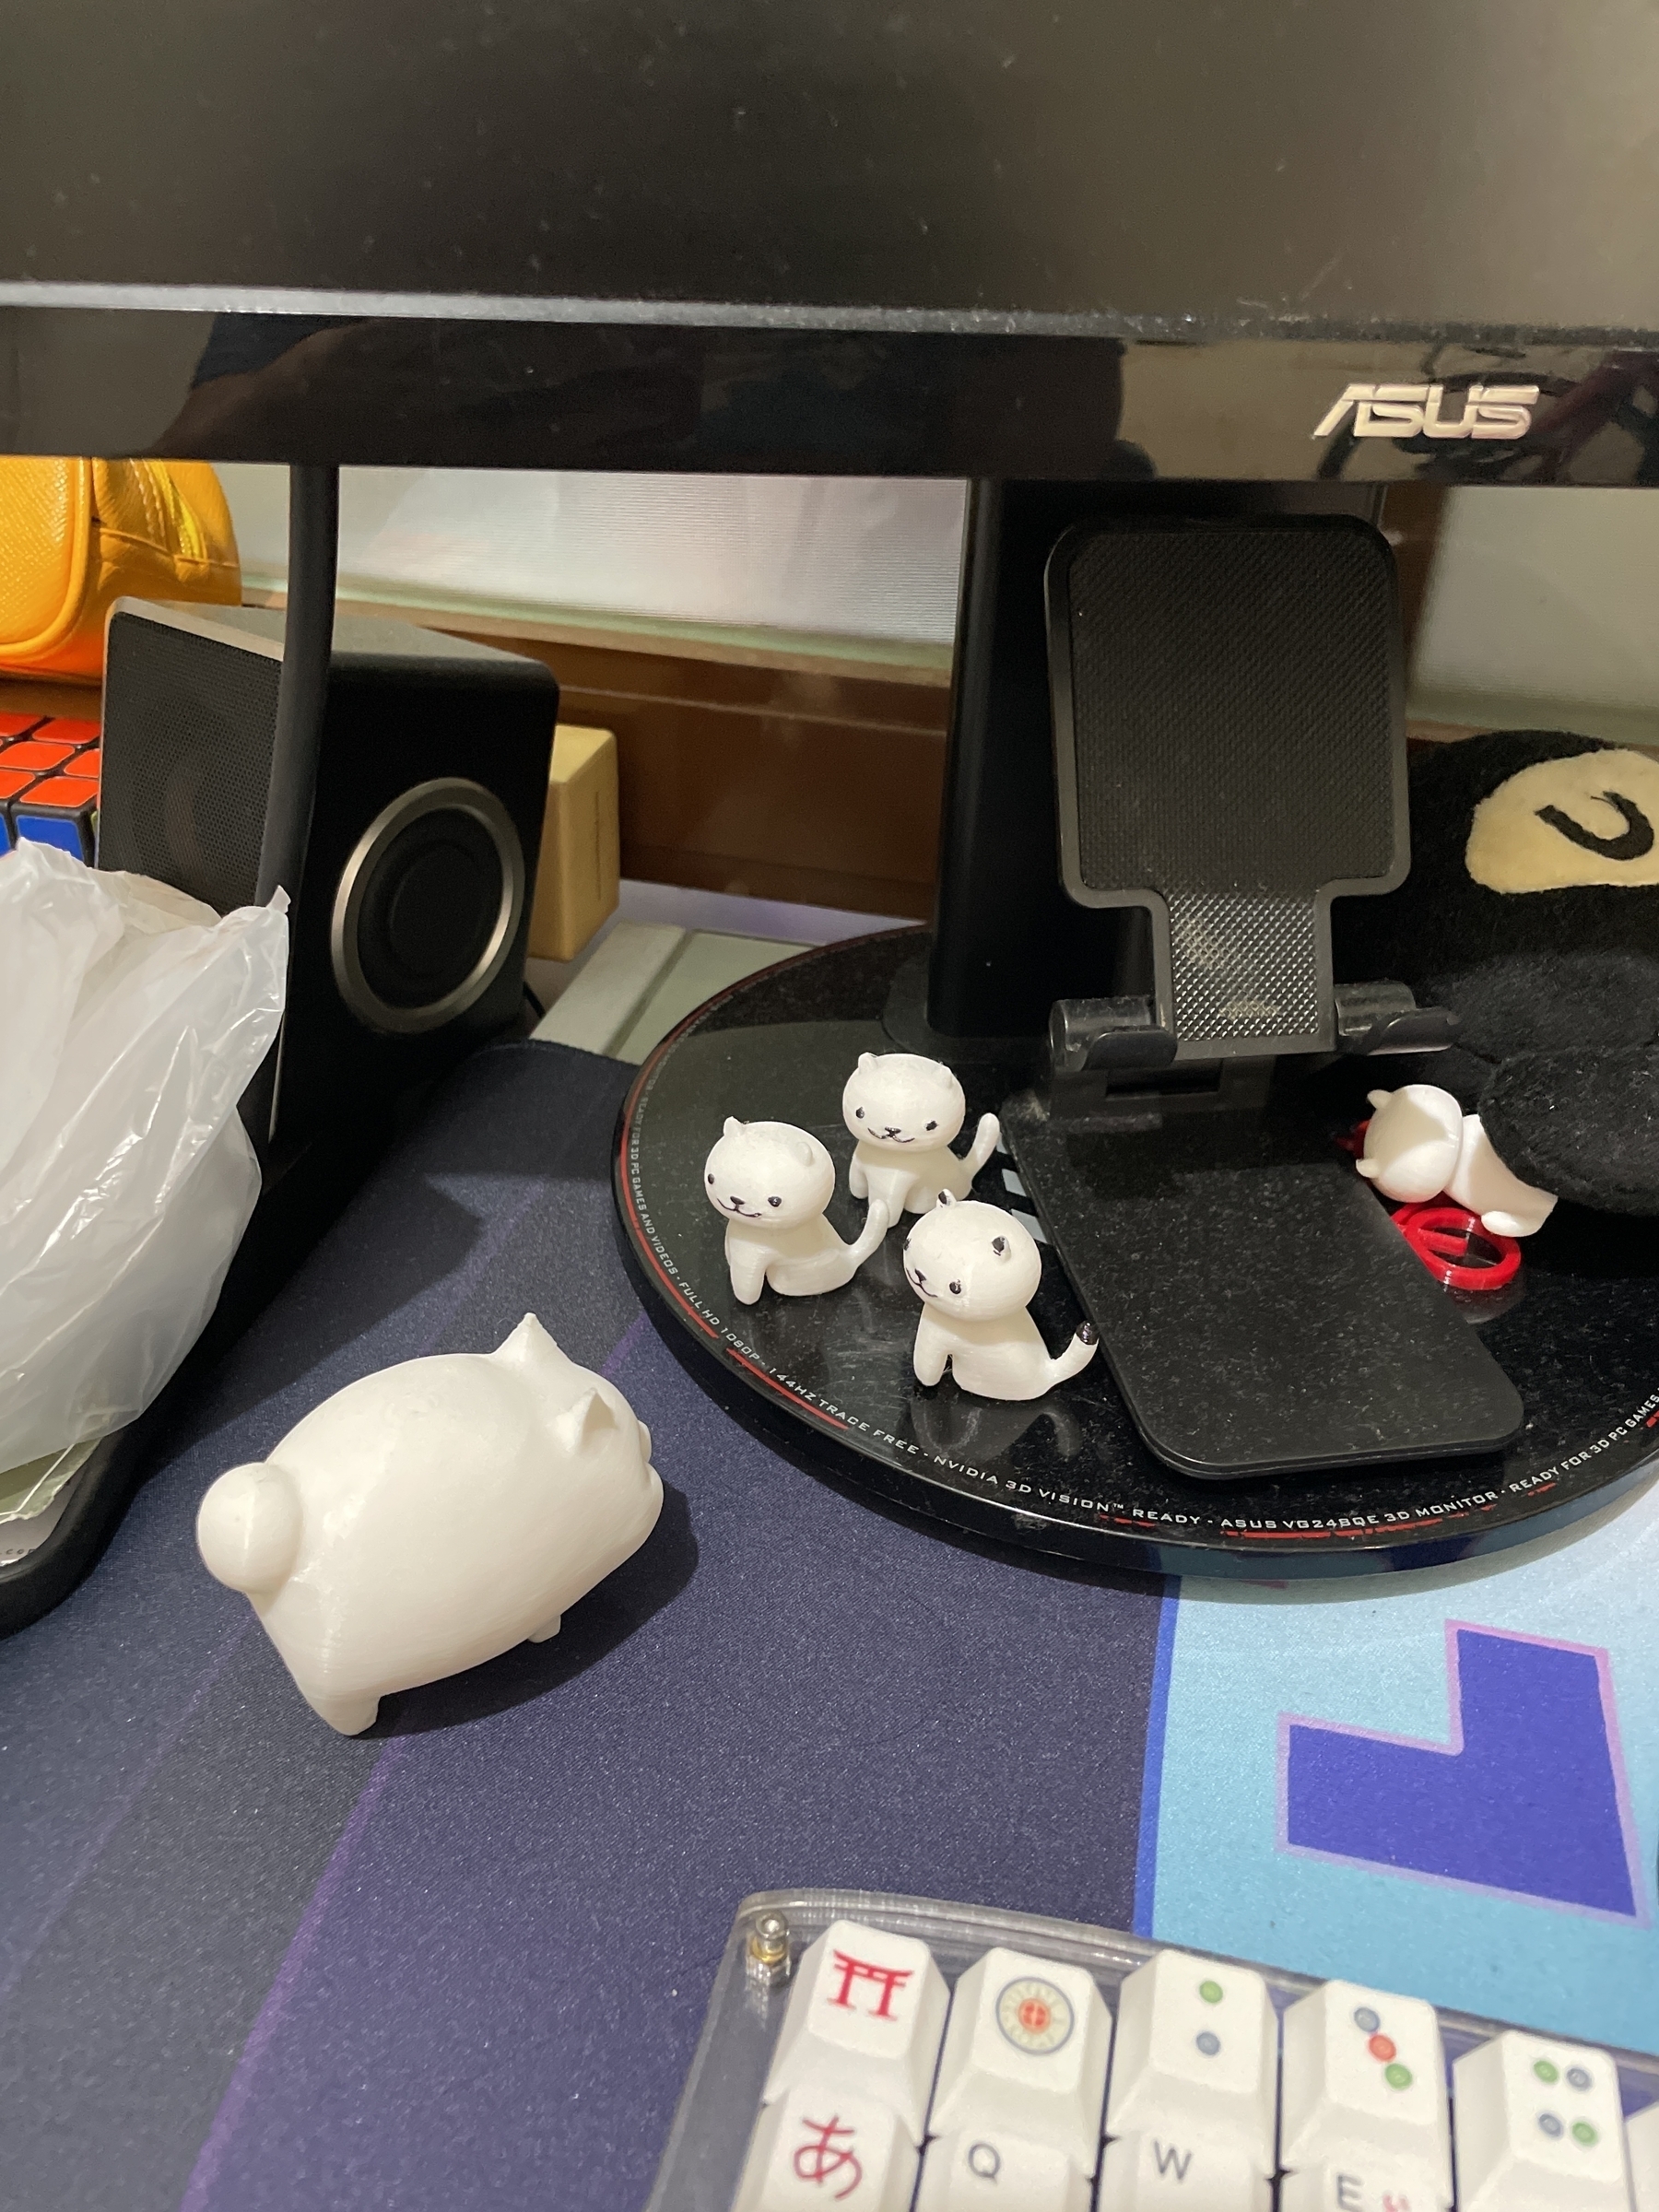 3 3d-printed small cats are found facing a 3d-printed fat cat on Chi’s desk. The small cats are on the monitor stand.